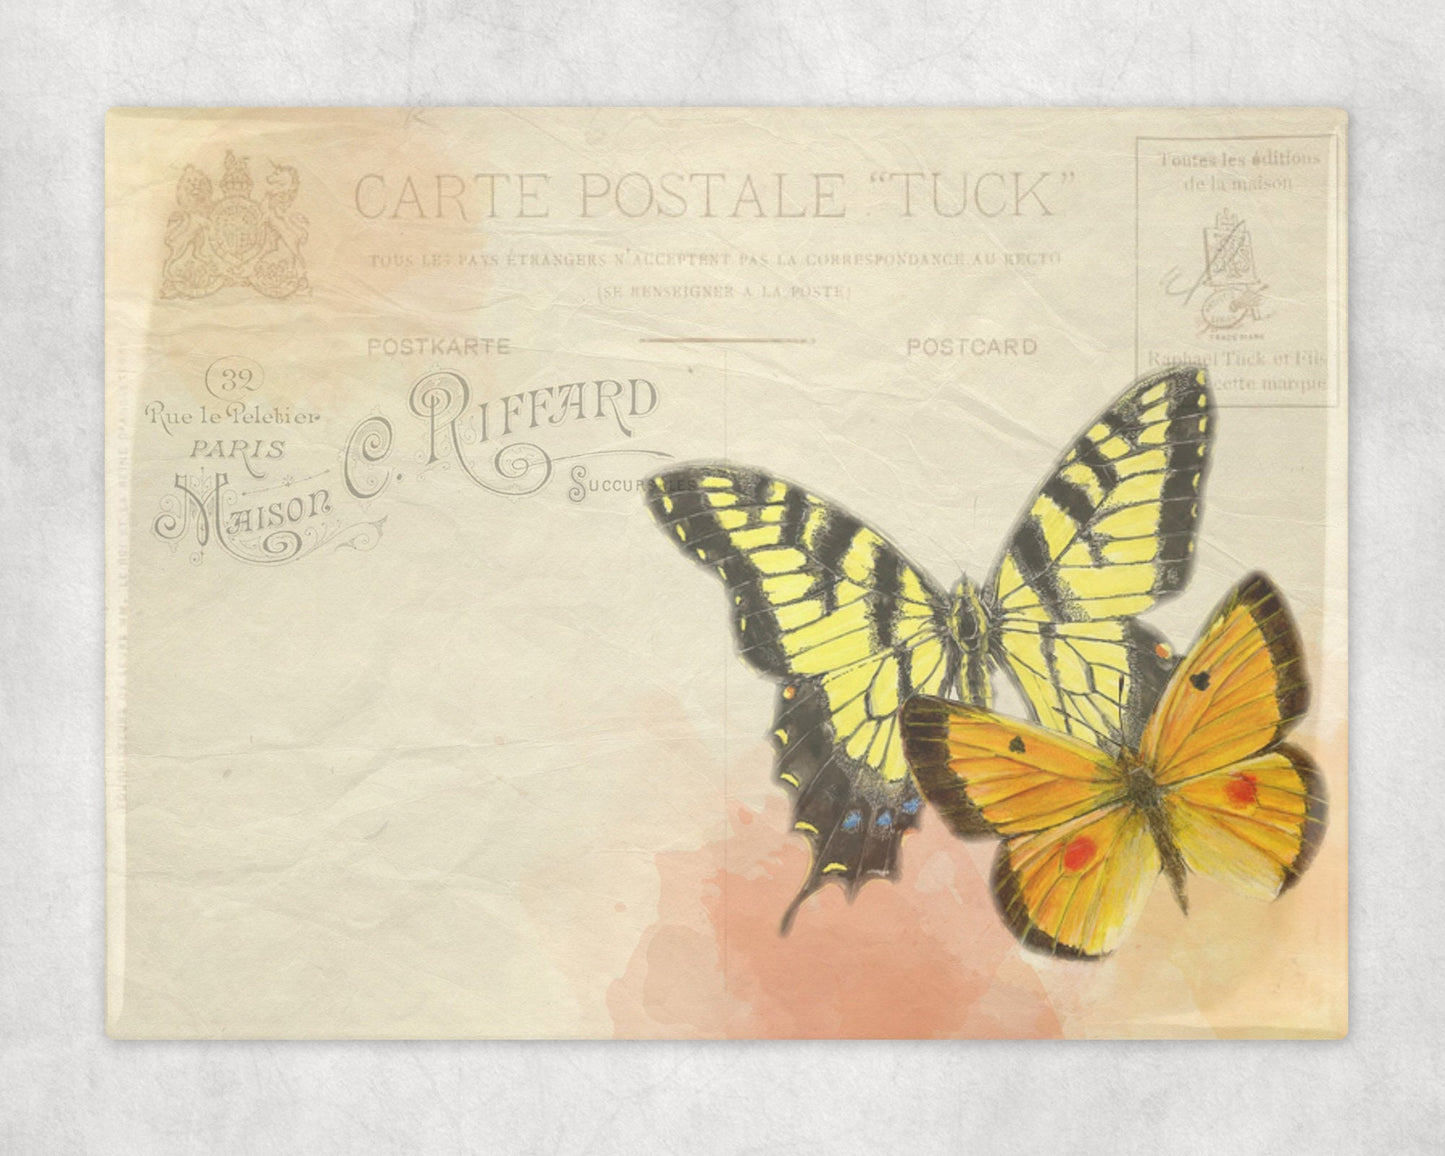 Butterfly Postcard Art Decorative Ceramic Tile with Optional Easel Back - 6x8 inches